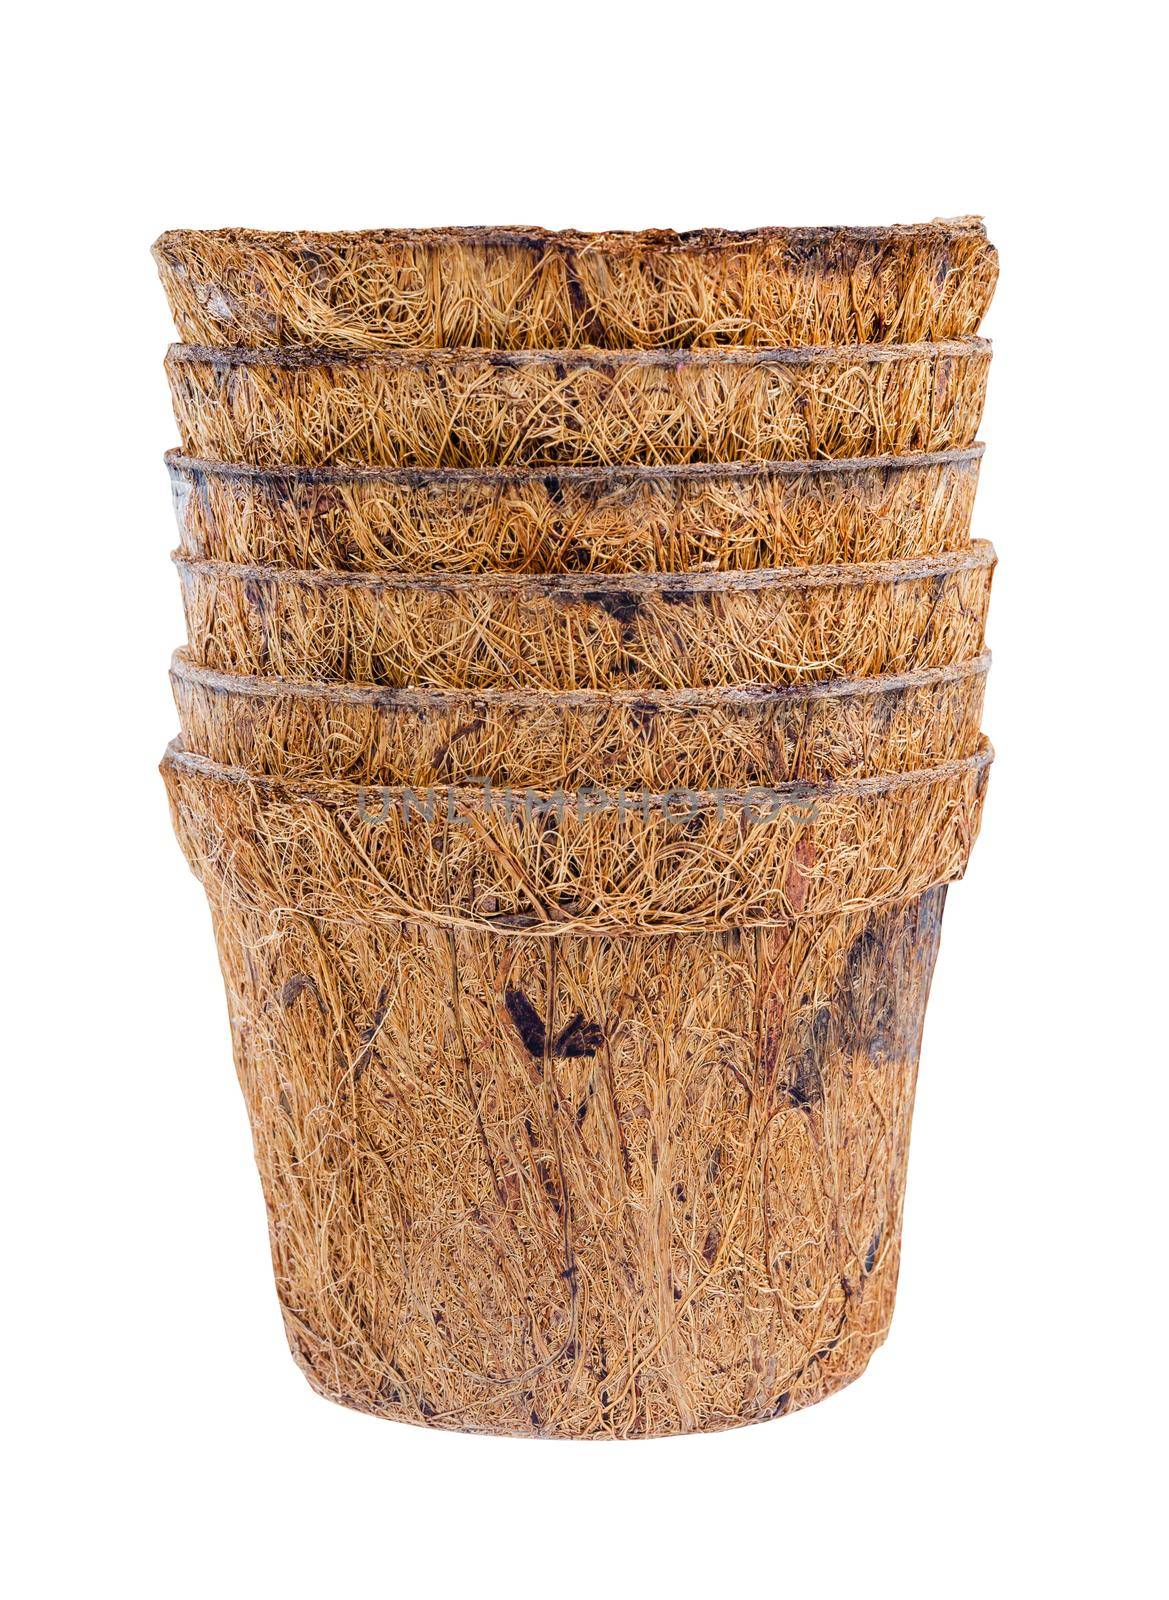 Plant pot, Coconut fiber plant isolated on a white background clipping path. by Gamjai